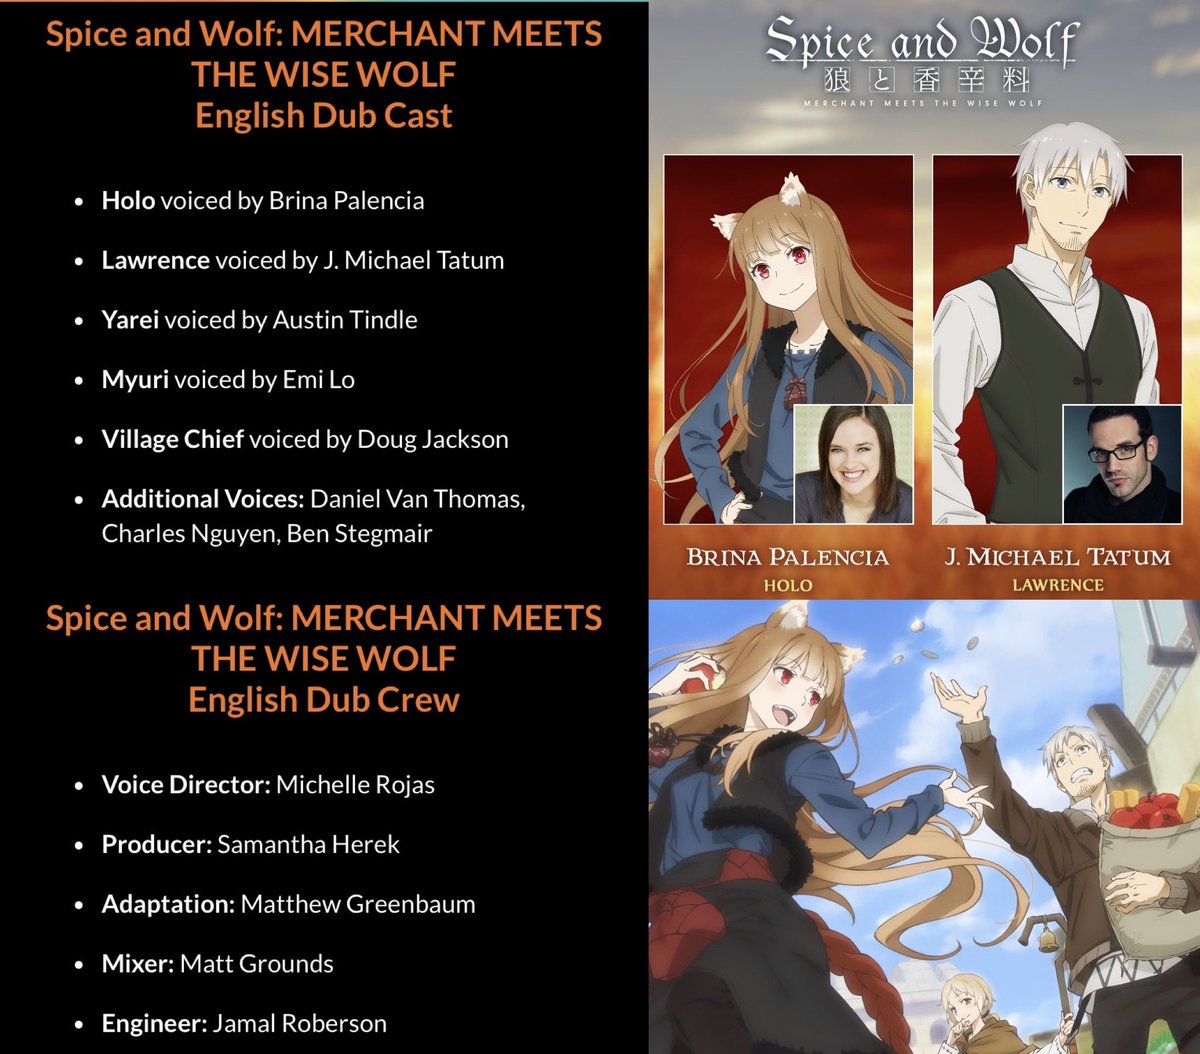 How wonderful to have our good friends the wise wolf and the merchant back!☺️ Welcome back @JMichaelTatum and #BrinaPalencia, and Congratulations to everyone who will be bringing this beloved tale back to us! #SpiceAndWolf @littleramyun @austintindle @KitsuneSqueak @jrdabest23